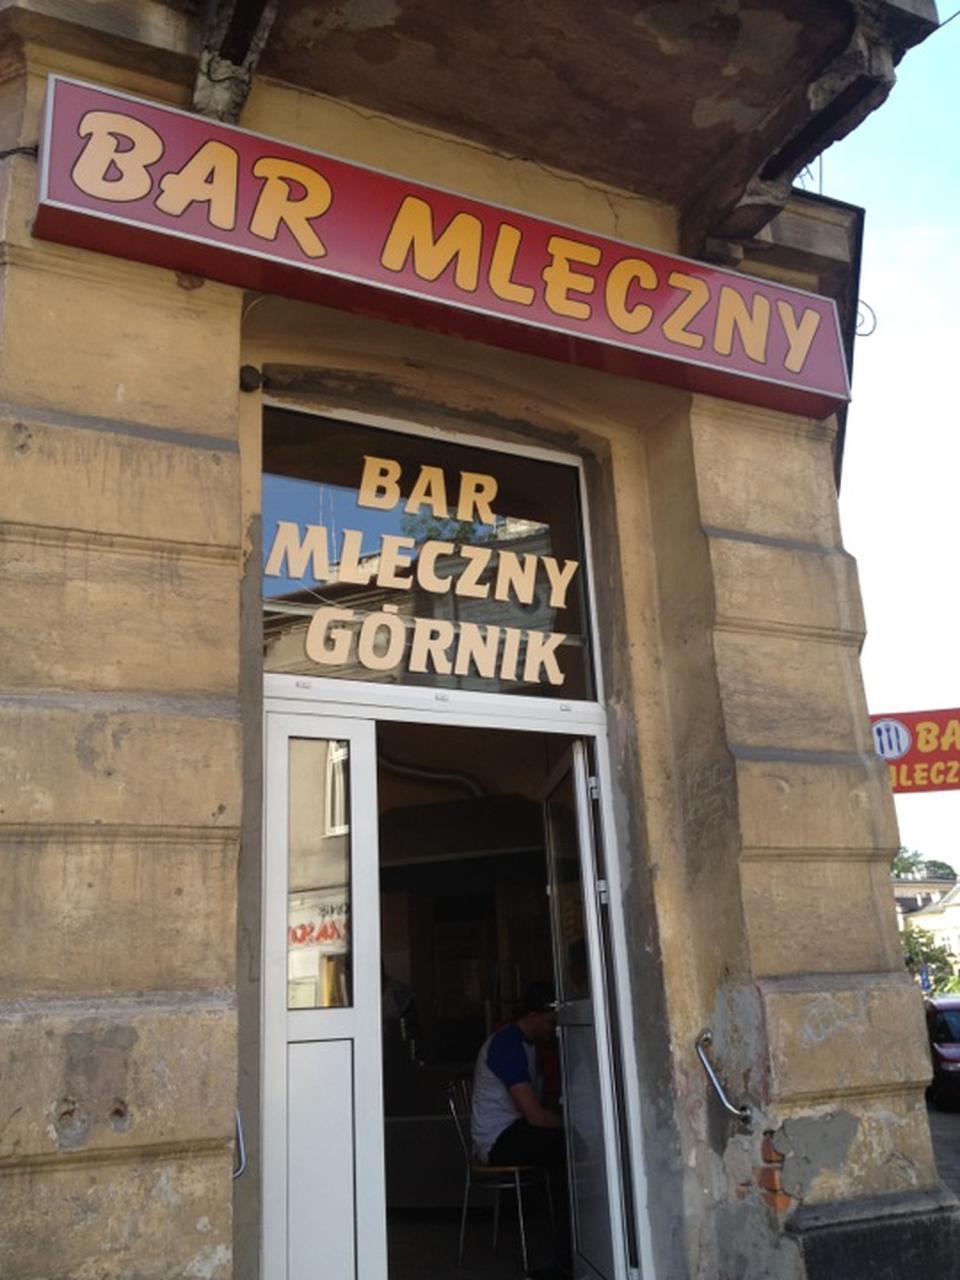 Cover image of this place Milk Bar "Górnik"